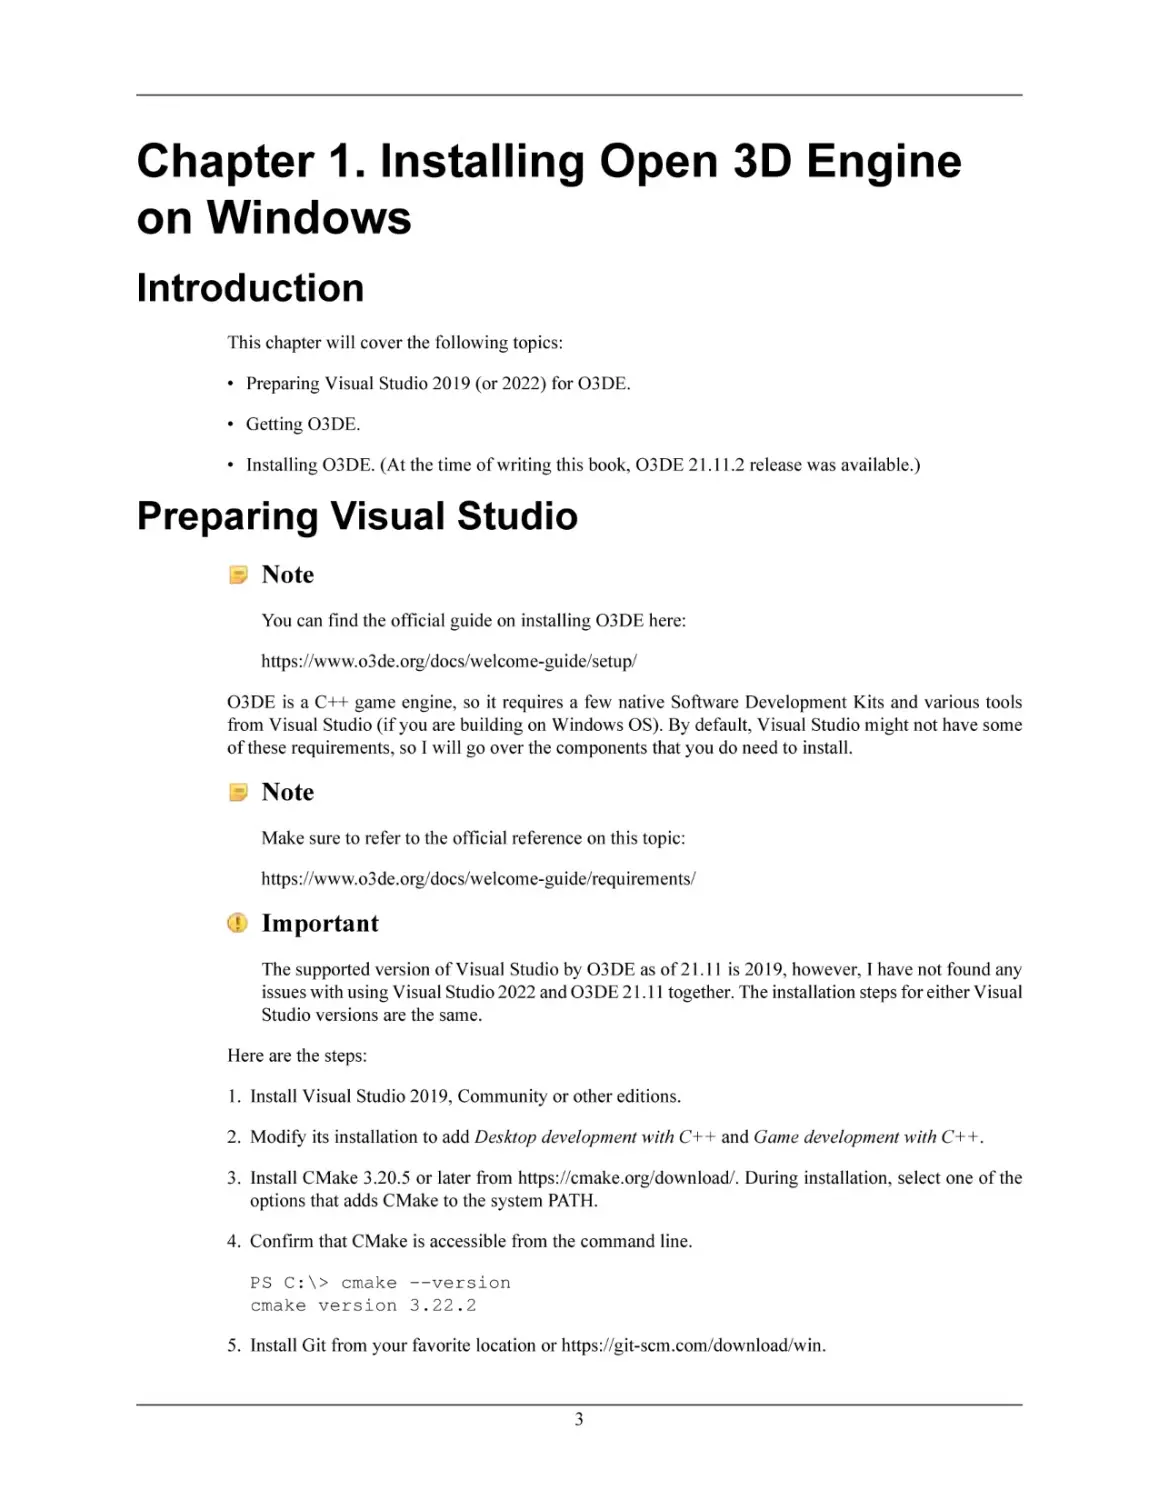 Chapter 1. Installing Open 3D Engine on Windows
Introduction
Preparing Visual Studio